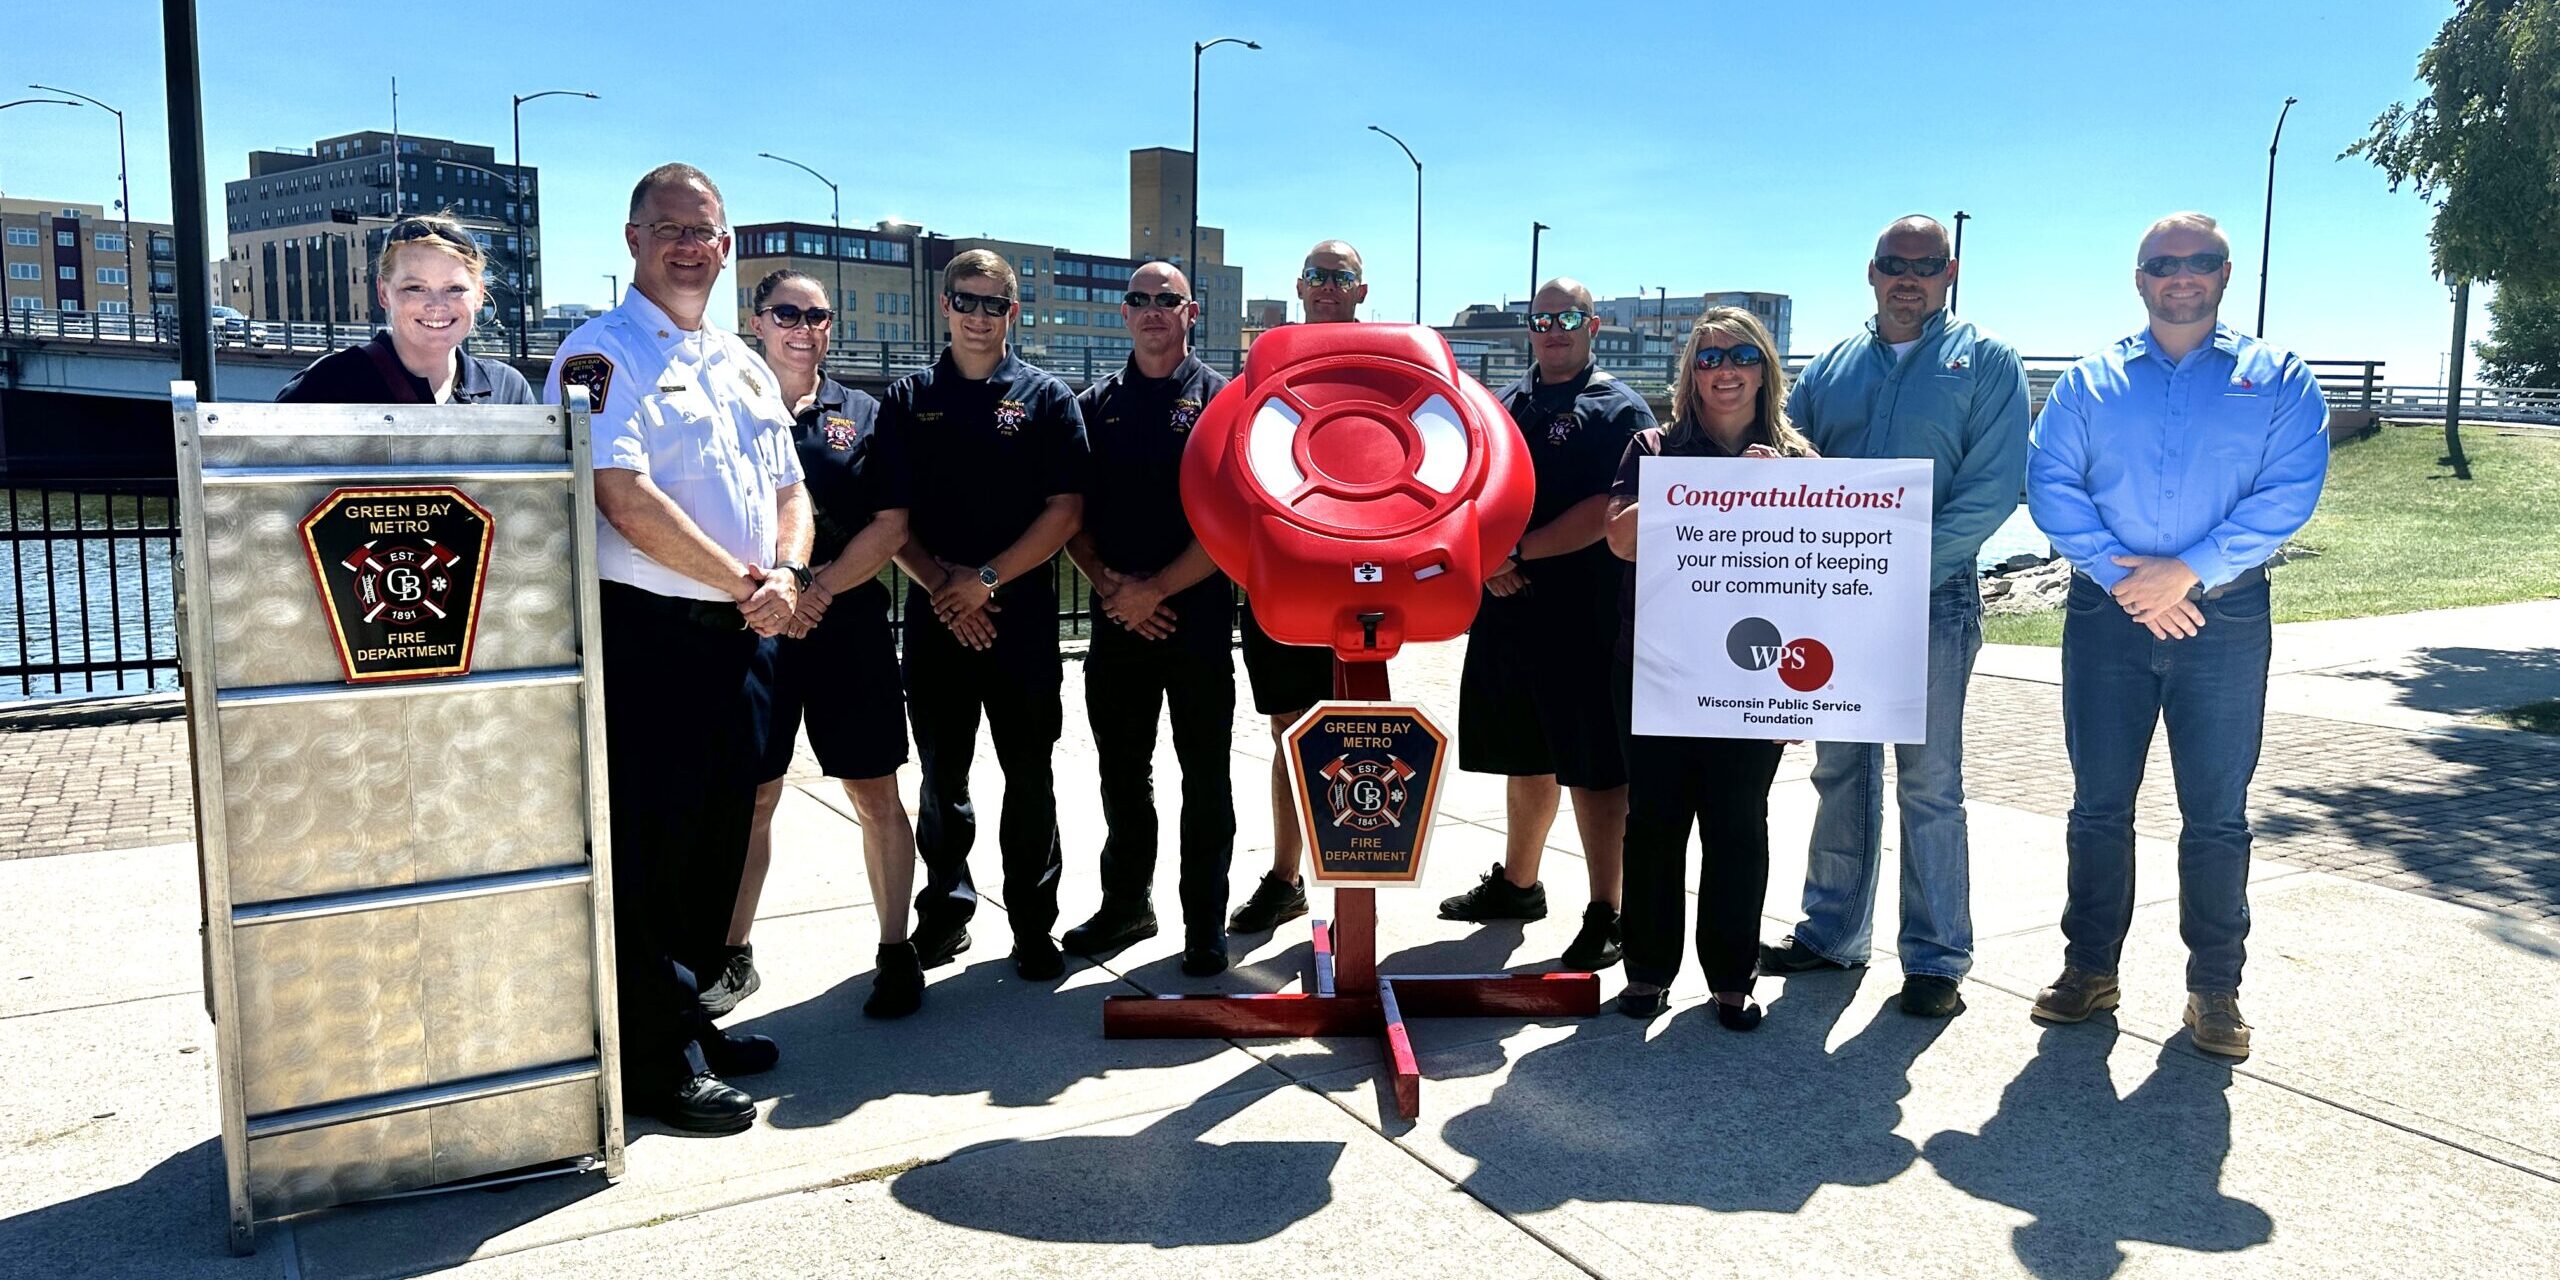 A group of men and women firefighters and WPS Foundation representatives stand next to a red life preserver ring on a stand.